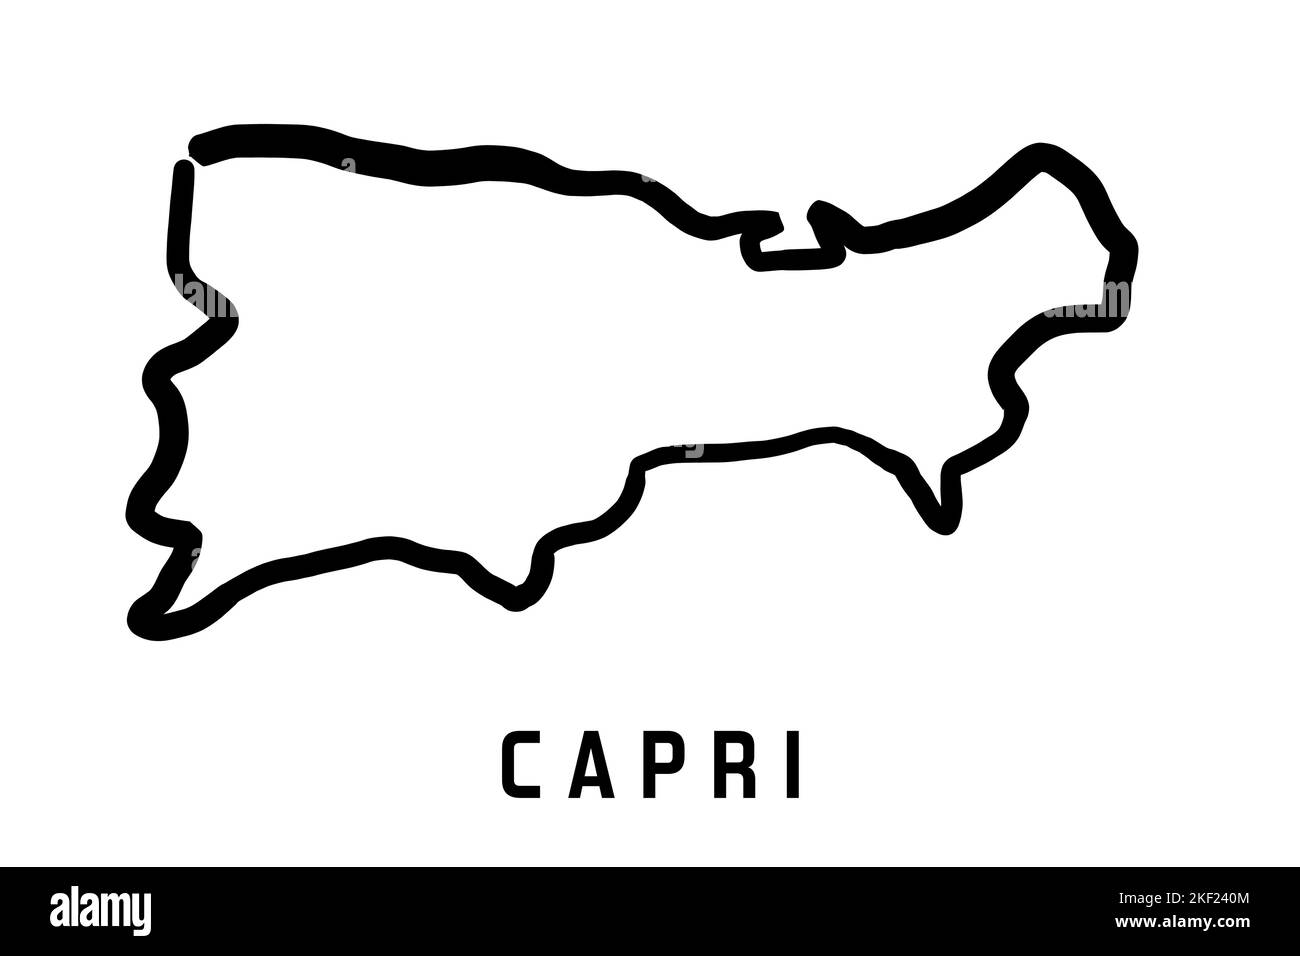 Capri island map simple outline. Vector hand drawn simplified style map. Capri, Italy. Stock Vector